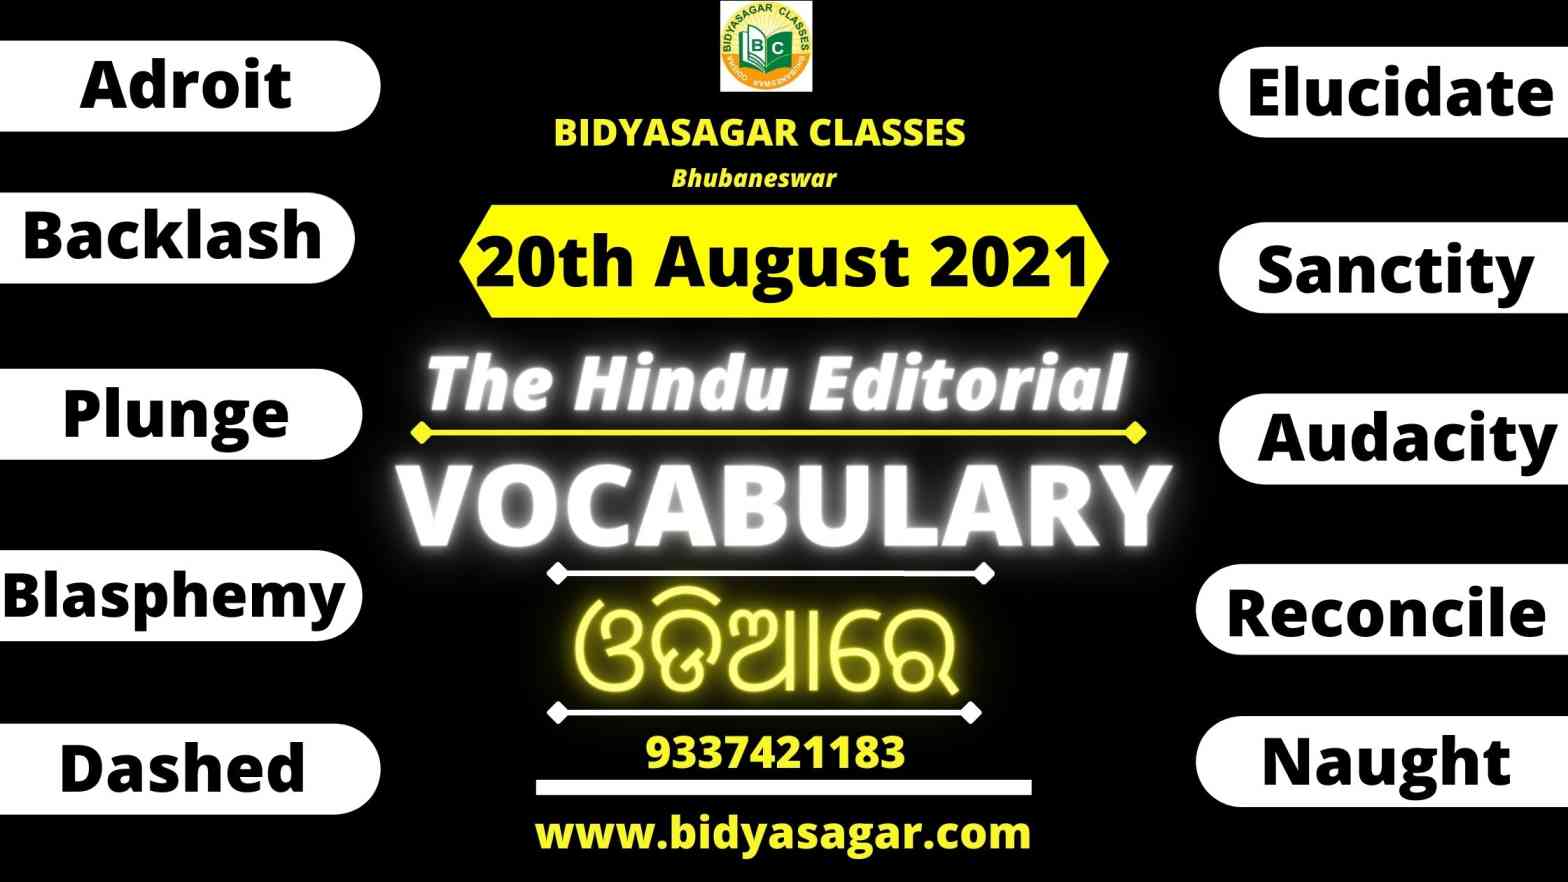 The Hindu Editorial Vocabulary of 20th August 2021